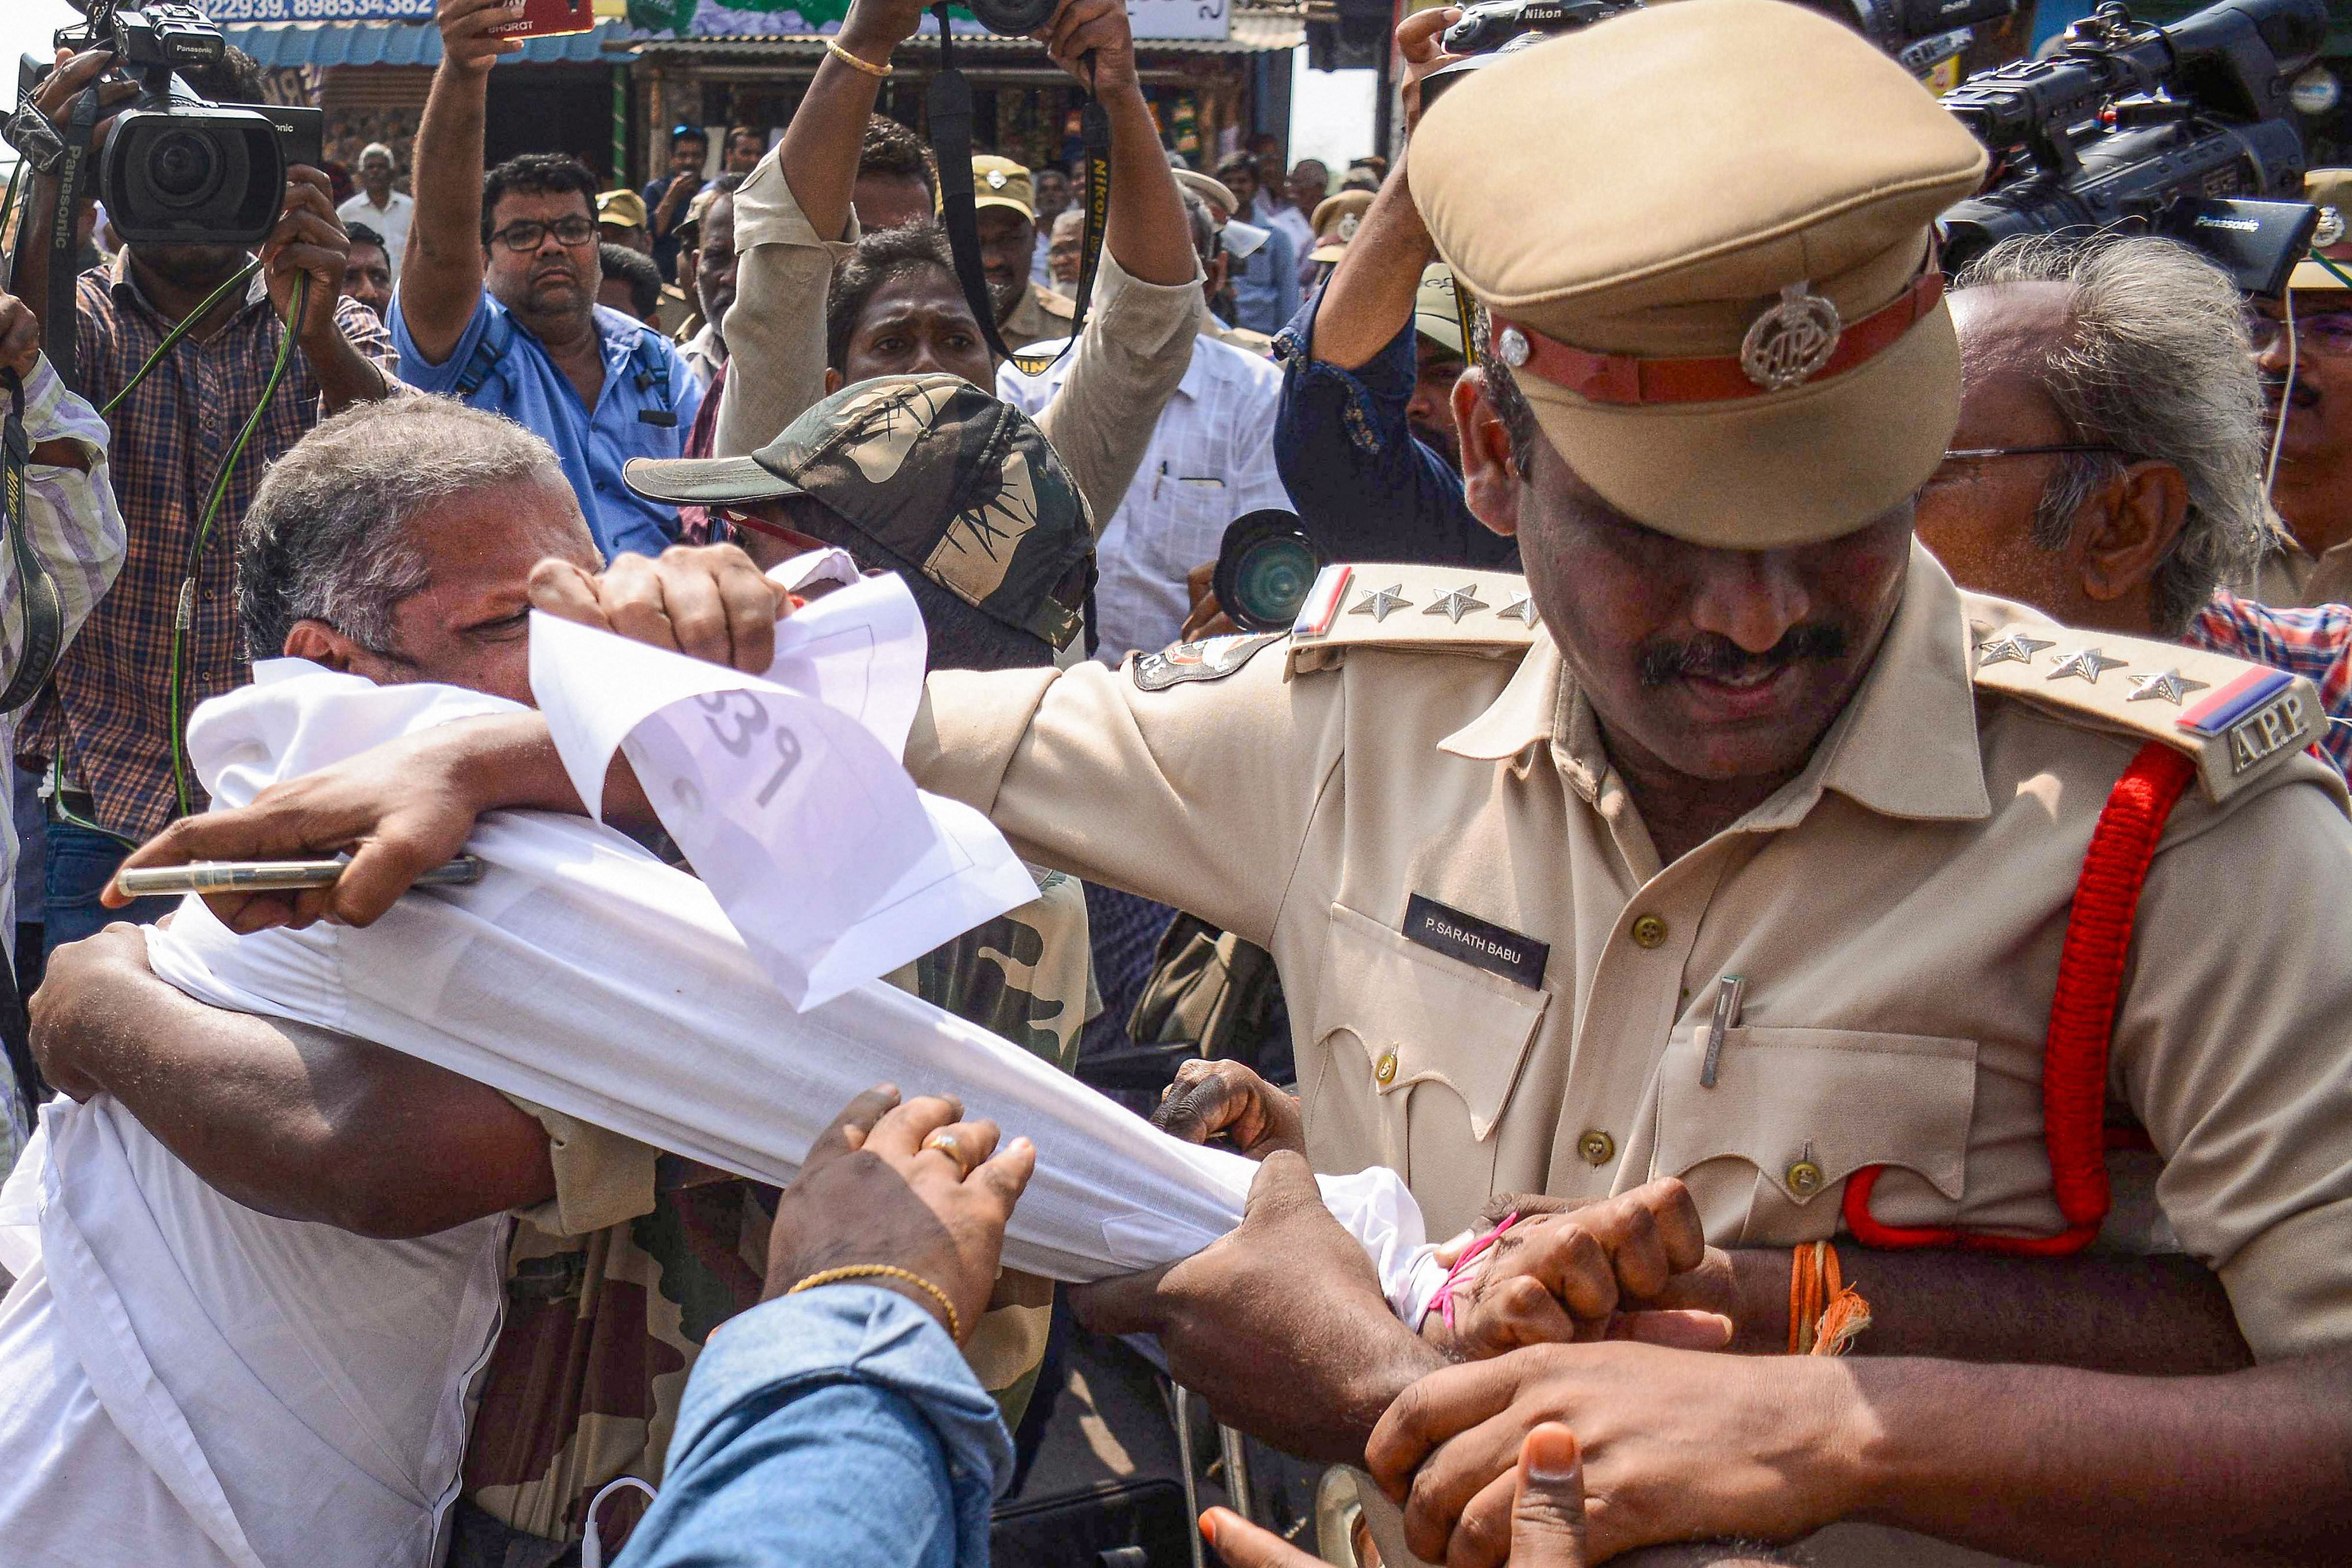 Police in action against farmers from the capital region villages, who were staging a protest to press for keeping the capital in Amaravati. (PTI Photo)